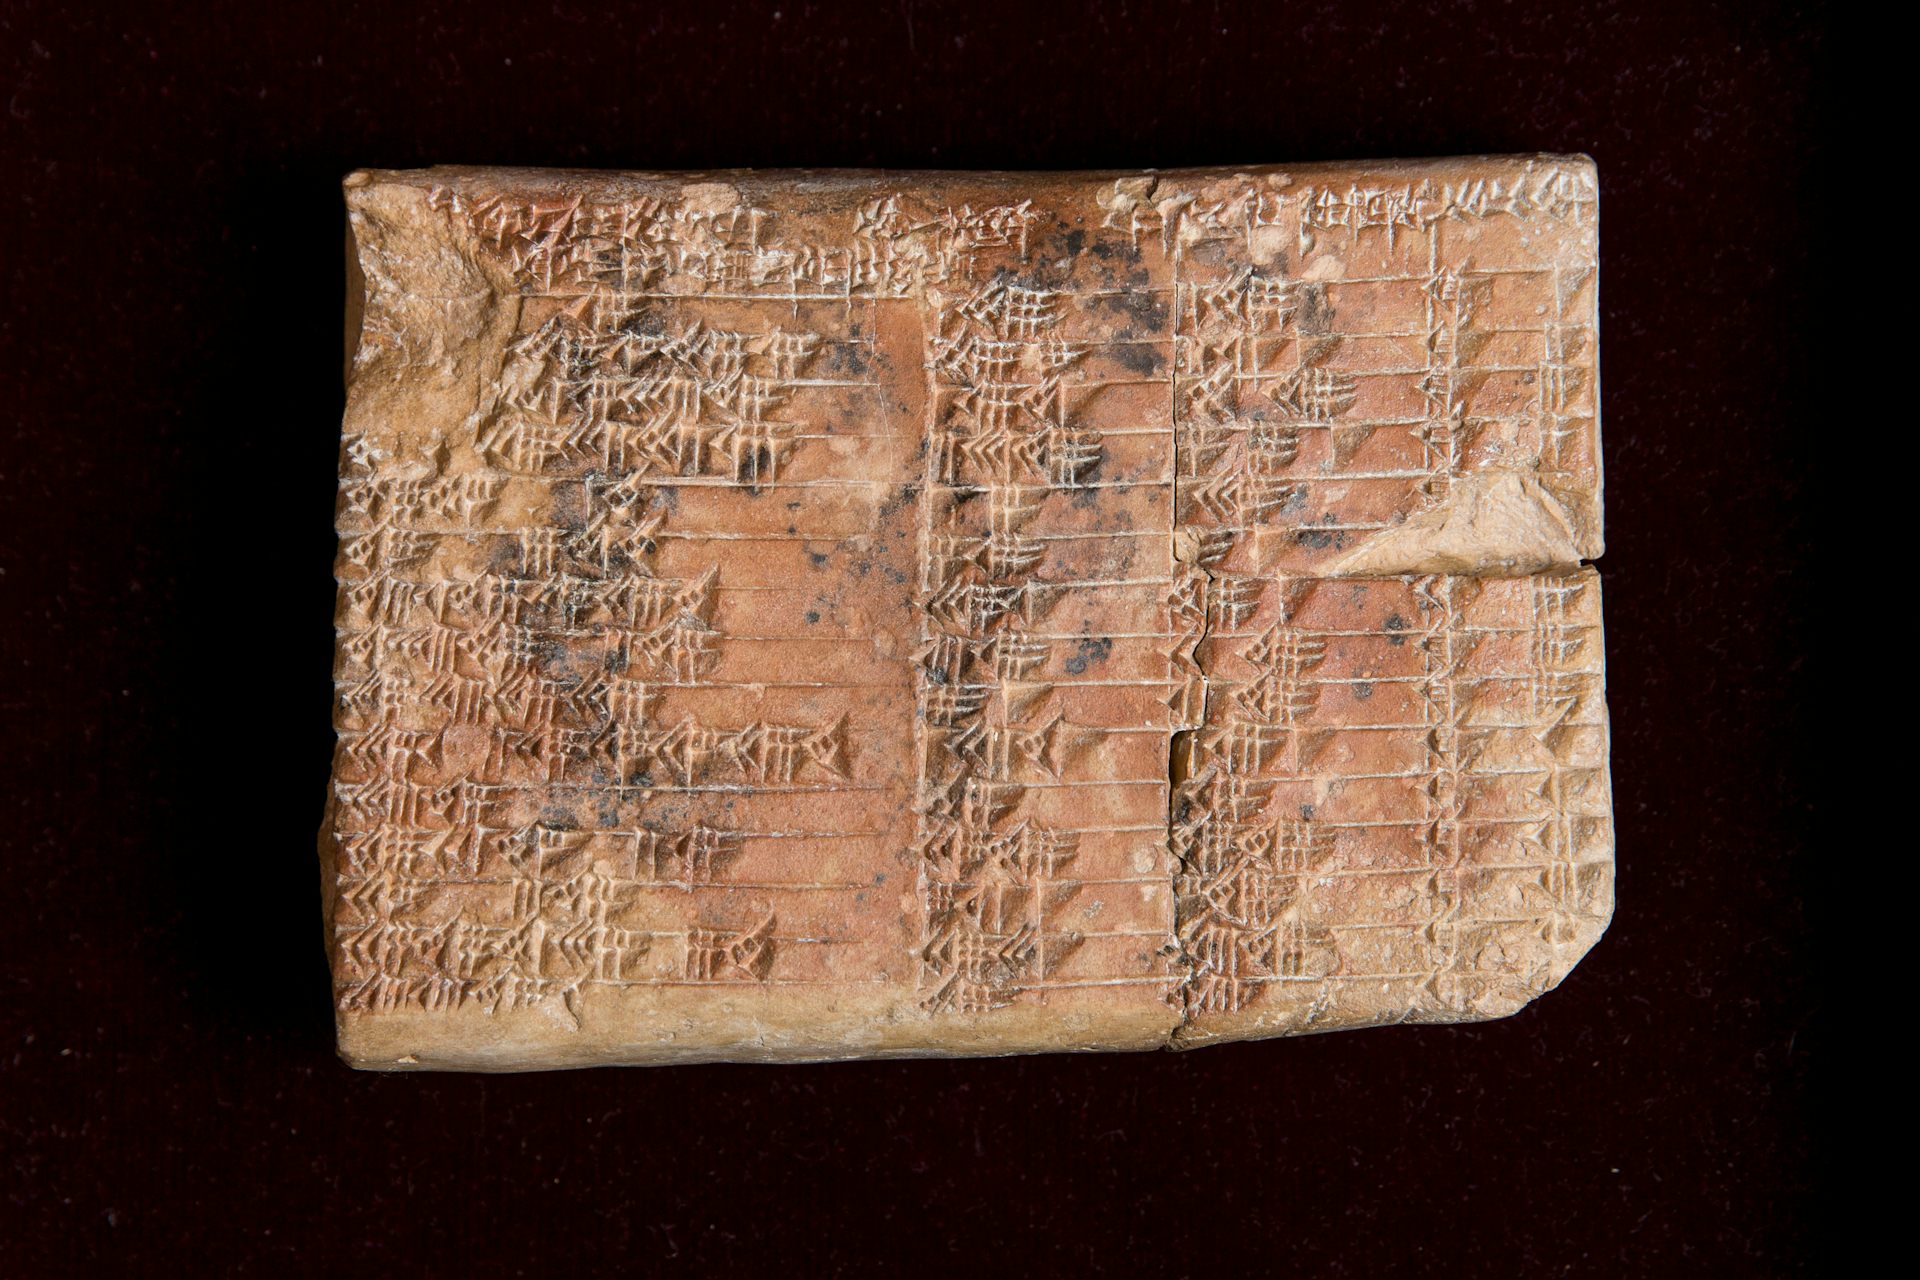 another name for babylonian numerals